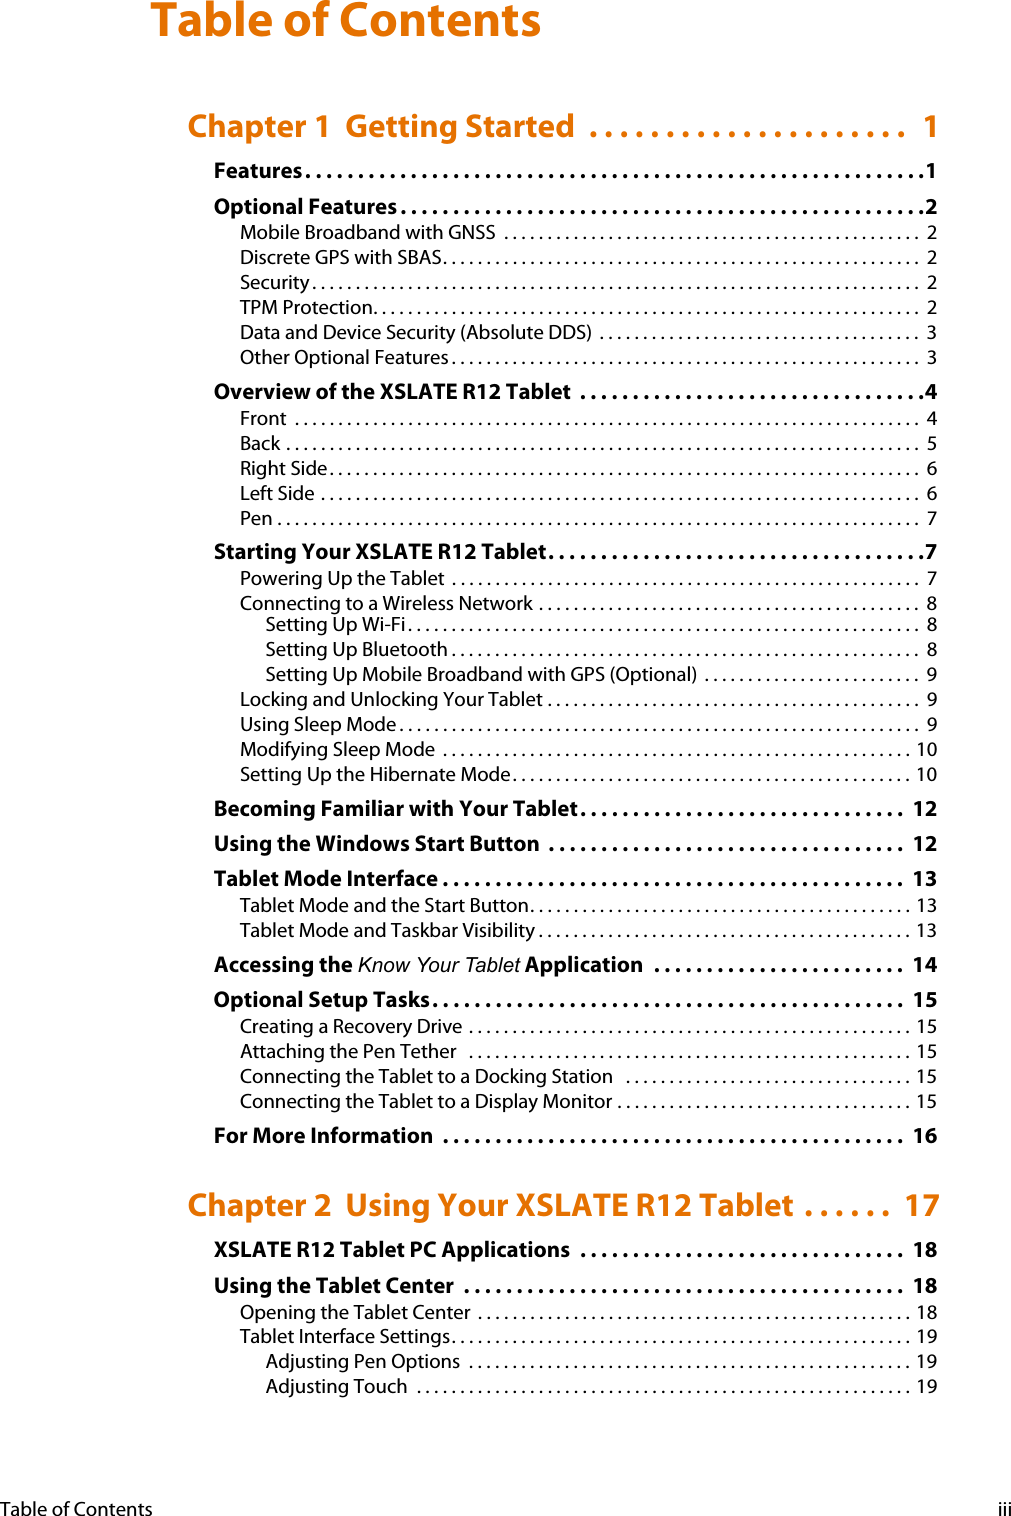 Table of Contents iiiChapter 1  Getting Started  . . . . . . . . . . . . . . . . . . . . .  1Features. . . . . . . . . . . . . . . . . . . . . . . . . . . . . . . . . . . . . . . . . . . . . . . . . . . . . . . . . . .1Optional Features . . . . . . . . . . . . . . . . . . . . . . . . . . . . . . . . . . . . . . . . . . . . . . . . . .2Mobile Broadband with GNSS  . . . . . . . . . . . . . . . . . . . . . . . . . . . . . . . . . . . . . . . . . . . . . . . .  2Discrete GPS with SBAS. . . . . . . . . . . . . . . . . . . . . . . . . . . . . . . . . . . . . . . . . . . . . . . . . . . . . . .  2Security . . . . . . . . . . . . . . . . . . . . . . . . . . . . . . . . . . . . . . . . . . . . . . . . . . . . . . . . . . . . . . . . . . . . . .  2TPM Protection. . . . . . . . . . . . . . . . . . . . . . . . . . . . . . . . . . . . . . . . . . . . . . . . . . . . . . . . . . . . . . .  2Data and Device Security (Absolute DDS)  . . . . . . . . . . . . . . . . . . . . . . . . . . . . . . . . . . . . .  3Other Optional Features . . . . . . . . . . . . . . . . . . . . . . . . . . . . . . . . . . . . . . . . . . . . . . . . . . . . . .  3Overview of the XSLATE R12 Tablet  . . . . . . . . . . . . . . . . . . . . . . . . . . . . . . . . .4Front  . . . . . . . . . . . . . . . . . . . . . . . . . . . . . . . . . . . . . . . . . . . . . . . . . . . . . . . . . . . . . . . . . . . . . . . .  4Back . . . . . . . . . . . . . . . . . . . . . . . . . . . . . . . . . . . . . . . . . . . . . . . . . . . . . . . . . . . . . . . . . . . . . . . . .  5Right Side. . . . . . . . . . . . . . . . . . . . . . . . . . . . . . . . . . . . . . . . . . . . . . . . . . . . . . . . . . . . . . . . . . . .  6Left Side . . . . . . . . . . . . . . . . . . . . . . . . . . . . . . . . . . . . . . . . . . . . . . . . . . . . . . . . . . . . . . . . . . . . .  6Pen . . . . . . . . . . . . . . . . . . . . . . . . . . . . . . . . . . . . . . . . . . . . . . . . . . . . . . . . . . . . . . . . . . . . . . . . . .  7Starting Your XSLATE R12 Tablet. . . . . . . . . . . . . . . . . . . . . . . . . . . . . . . . . . . .7Powering Up the Tablet  . . . . . . . . . . . . . . . . . . . . . . . . . . . . . . . . . . . . . . . . . . . . . . . . . . . . . .  7Connecting to a Wireless Network . . . . . . . . . . . . . . . . . . . . . . . . . . . . . . . . . . . . . . . . . . . .  8Setting Up Wi-Fi. . . . . . . . . . . . . . . . . . . . . . . . . . . . . . . . . . . . . . . . . . . . . . . . . . . . . . . . . . .  8Setting Up Bluetooth . . . . . . . . . . . . . . . . . . . . . . . . . . . . . . . . . . . . . . . . . . . . . . . . . . . . . . 8Setting Up Mobile Broadband with GPS (Optional)  . . . . . . . . . . . . . . . . . . . . . . . . .  9Locking and Unlocking Your Tablet . . . . . . . . . . . . . . . . . . . . . . . . . . . . . . . . . . . . . . . . . . .  9Using Sleep Mode . . . . . . . . . . . . . . . . . . . . . . . . . . . . . . . . . . . . . . . . . . . . . . . . . . . . . . . . . . . .  9Modifying Sleep Mode  . . . . . . . . . . . . . . . . . . . . . . . . . . . . . . . . . . . . . . . . . . . . . . . . . . . . . . 10Setting Up the Hibernate Mode. . . . . . . . . . . . . . . . . . . . . . . . . . . . . . . . . . . . . . . . . . . . . . 10Becoming Familiar with Your Tablet. . . . . . . . . . . . . . . . . . . . . . . . . . . . . . .  12Using the Windows Start Button  . . . . . . . . . . . . . . . . . . . . . . . . . . . . . . . . . .  12Tablet Mode Interface . . . . . . . . . . . . . . . . . . . . . . . . . . . . . . . . . . . . . . . . . . . .  13Tablet Mode and the Start Button. . . . . . . . . . . . . . . . . . . . . . . . . . . . . . . . . . . . . . . . . . . . 13Tablet Mode and Taskbar Visibility . . . . . . . . . . . . . . . . . . . . . . . . . . . . . . . . . . . . . . . . . . . 13Accessing the Know Your Tablet Application  . . . . . . . . . . . . . . . . . . . . . . . .  14Optional Setup Tasks. . . . . . . . . . . . . . . . . . . . . . . . . . . . . . . . . . . . . . . . . . . . .  15Creating a Recovery Drive  . . . . . . . . . . . . . . . . . . . . . . . . . . . . . . . . . . . . . . . . . . . . . . . . . . . 15Attaching the Pen Tether   . . . . . . . . . . . . . . . . . . . . . . . . . . . . . . . . . . . . . . . . . . . . . . . . . . . 15Connecting the Tablet to a Docking Station   . . . . . . . . . . . . . . . . . . . . . . . . . . . . . . . . . 15Connecting the Tablet to a Display Monitor . . . . . . . . . . . . . . . . . . . . . . . . . . . . . . . . . . 15For More Information  . . . . . . . . . . . . . . . . . . . . . . . . . . . . . . . . . . . . . . . . . . . .  16Chapter 2  Using Your XSLATE R12 Tablet . . . . . .  17XSLATE R12 Tablet PC Applications  . . . . . . . . . . . . . . . . . . . . . . . . . . . . . . .  18Using the Tablet Center  . . . . . . . . . . . . . . . . . . . . . . . . . . . . . . . . . . . . . . . . . .  18Opening the Tablet Center  . . . . . . . . . . . . . . . . . . . . . . . . . . . . . . . . . . . . . . . . . . . . . . . . . . 18Tablet Interface Settings. . . . . . . . . . . . . . . . . . . . . . . . . . . . . . . . . . . . . . . . . . . . . . . . . . . . . 19Adjusting Pen Options  . . . . . . . . . . . . . . . . . . . . . . . . . . . . . . . . . . . . . . . . . . . . . . . . . . . 19Adjusting Touch  . . . . . . . . . . . . . . . . . . . . . . . . . . . . . . . . . . . . . . . . . . . . . . . . . . . . . . . . . 19Table of Contents 